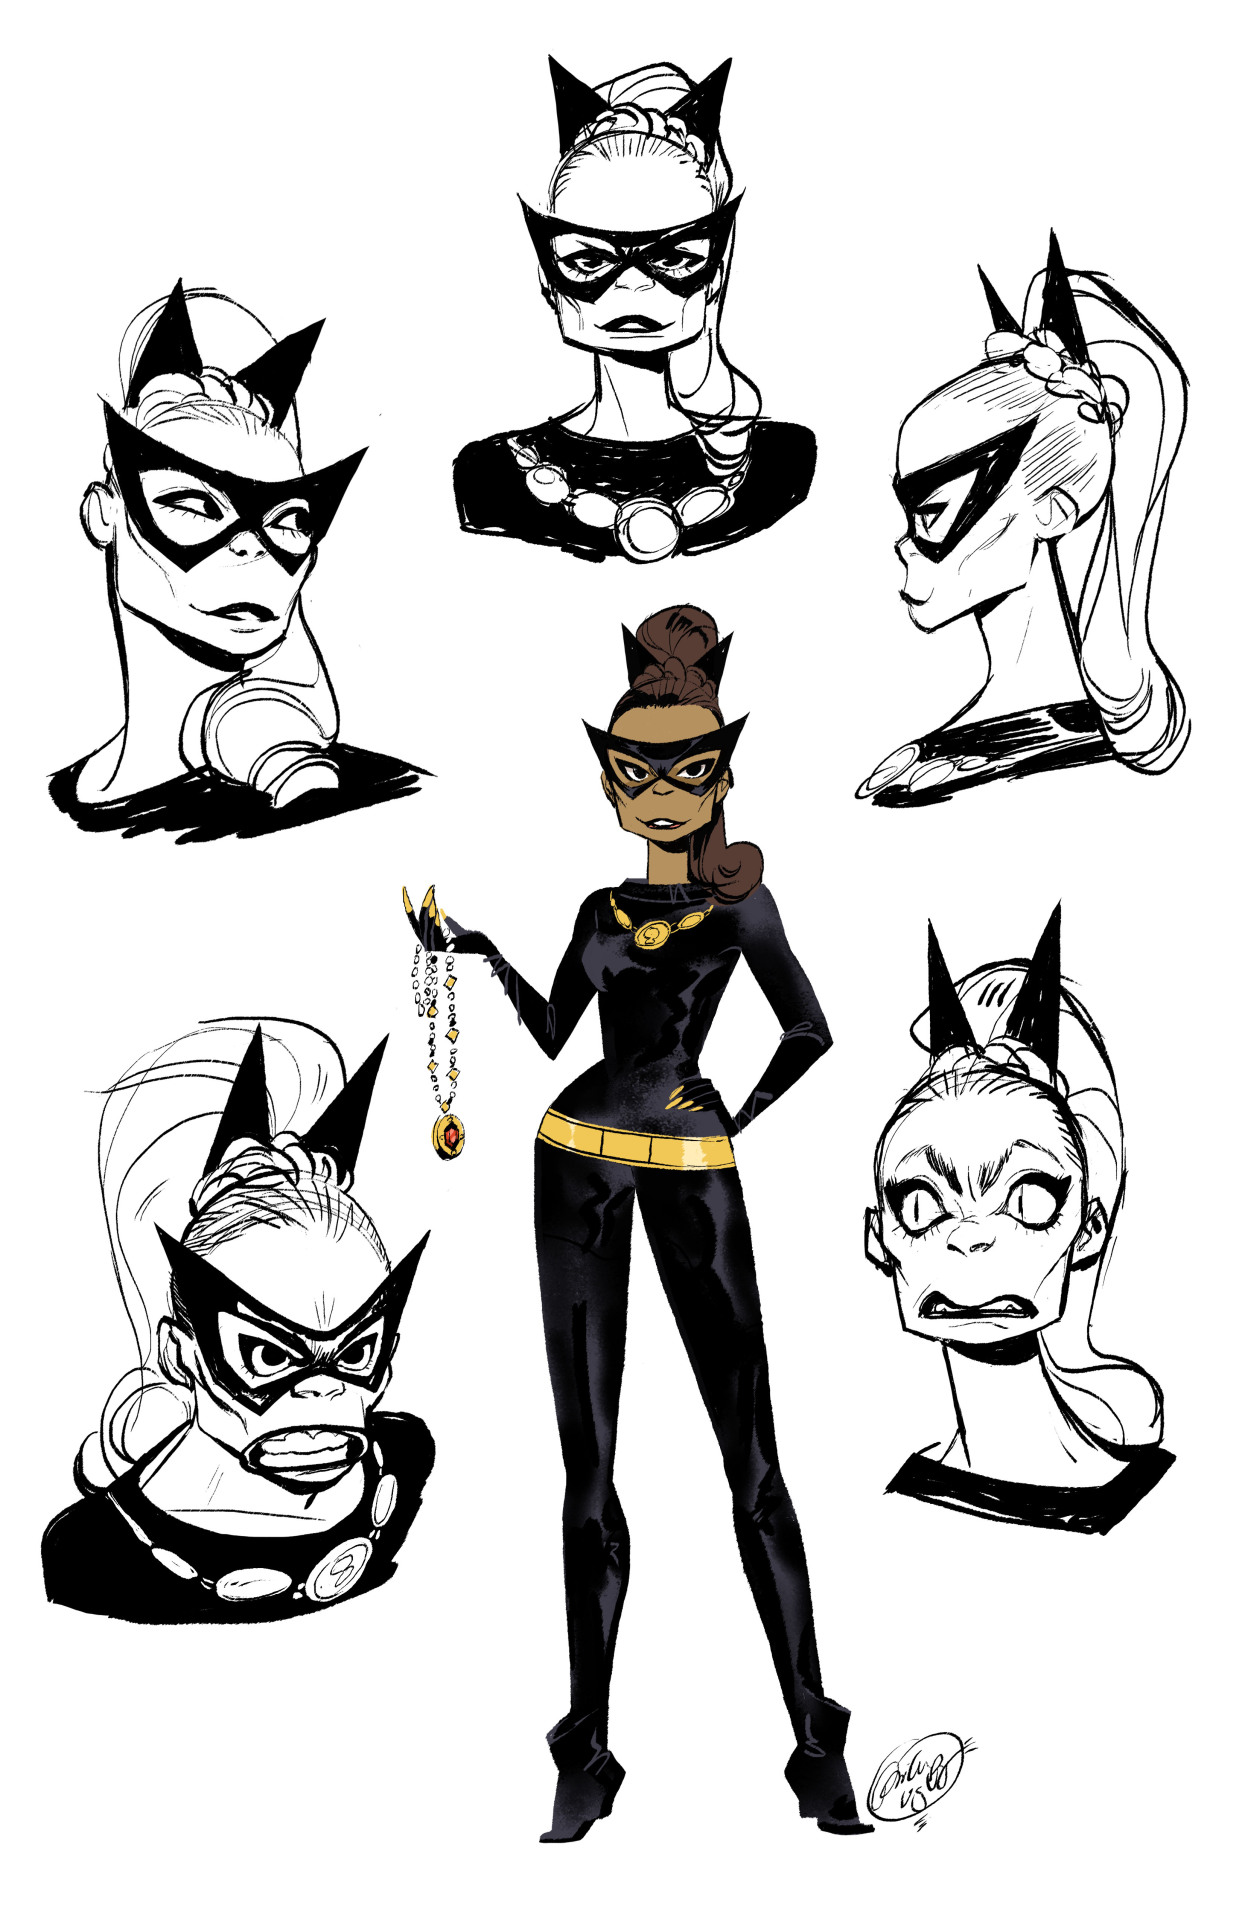 philliplight:  One of my coworkers and I decided to draw Catwoman for funsies! I